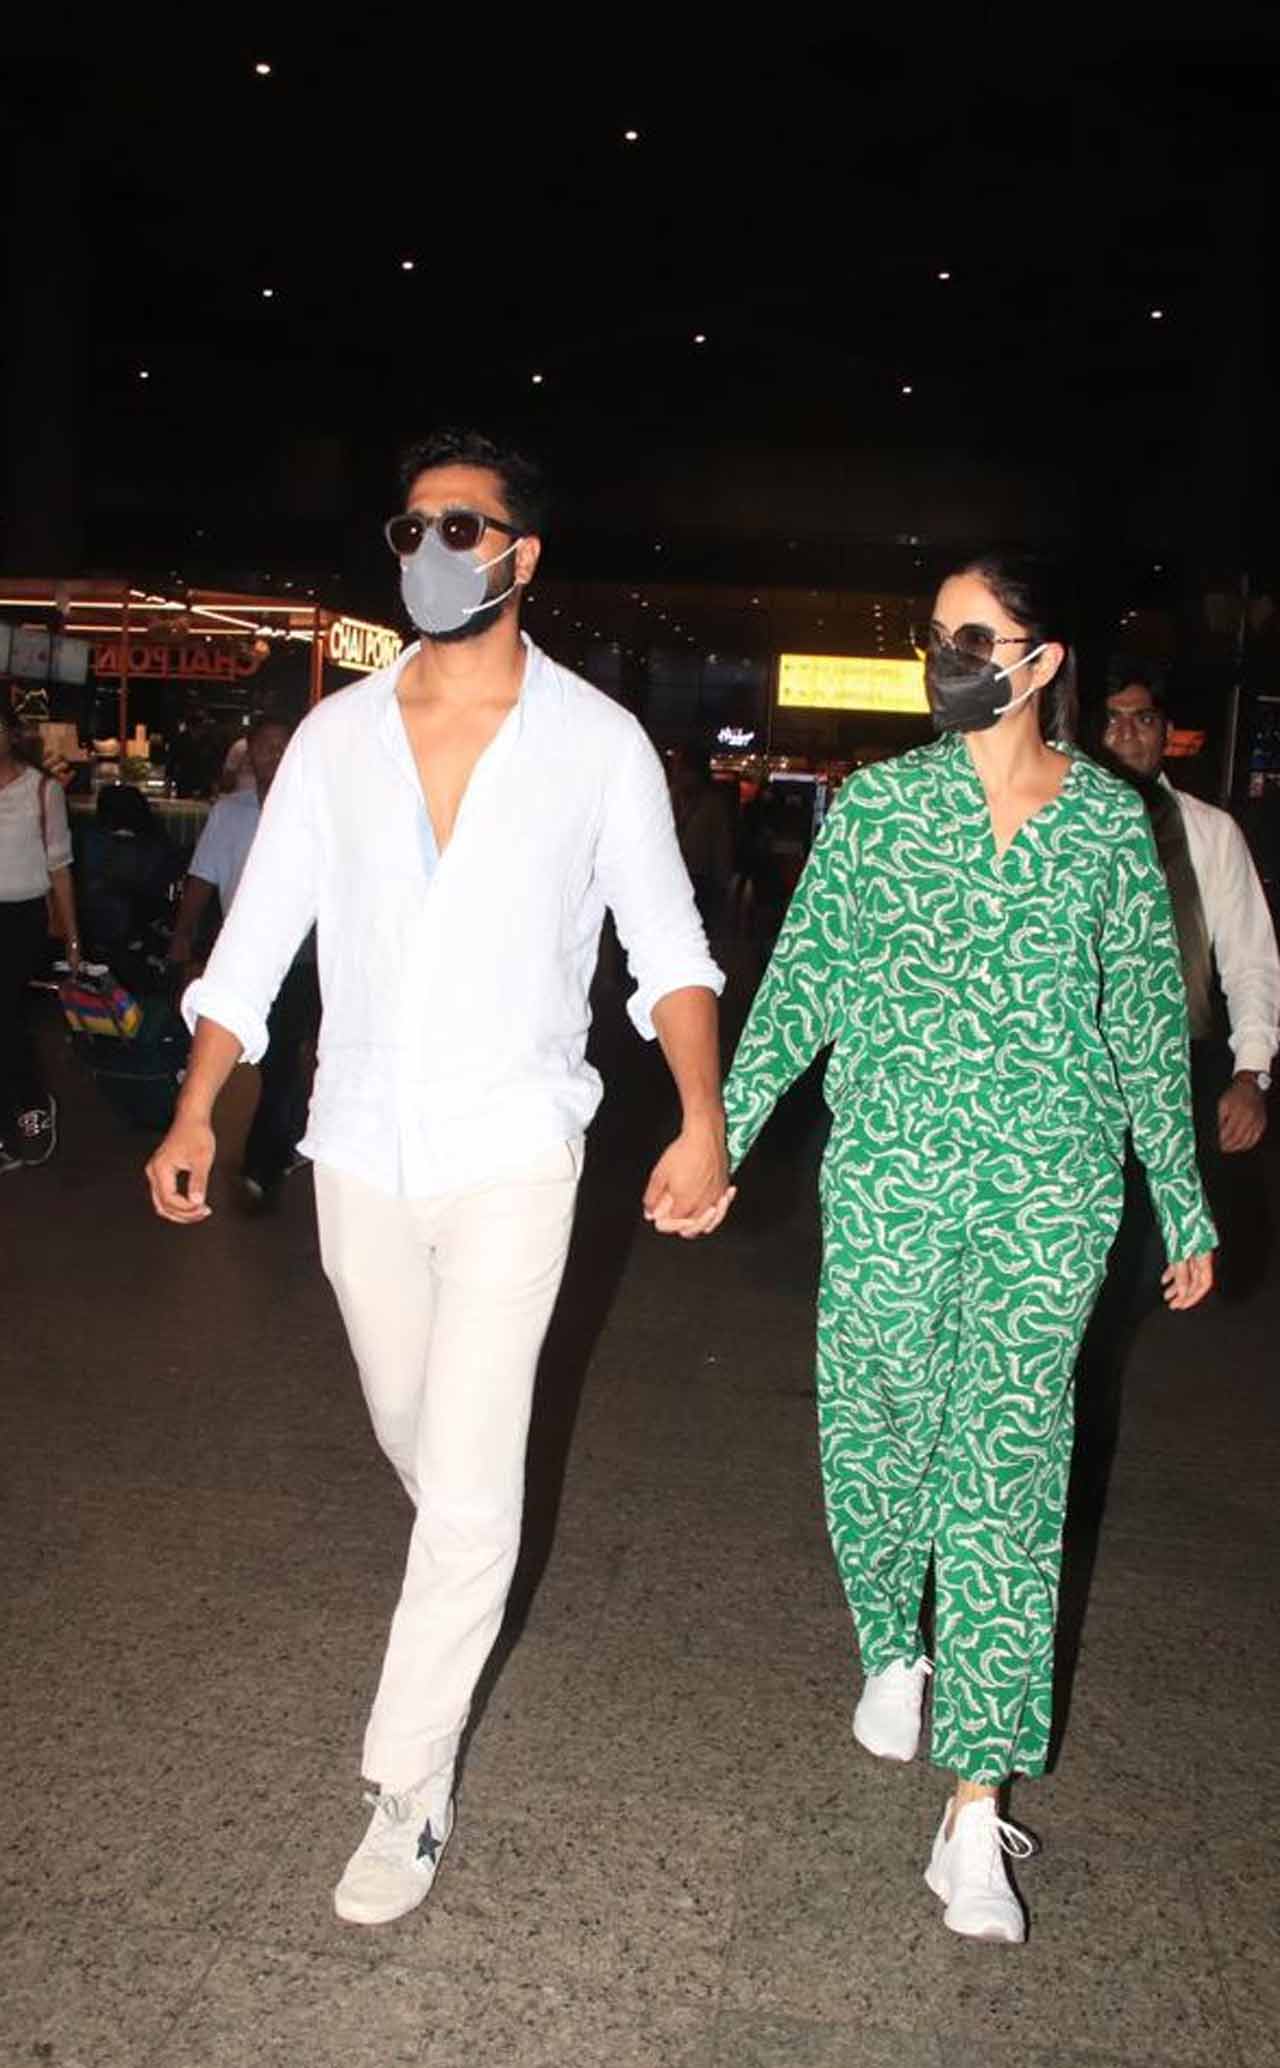 For the unversed, Vicky and Katrina tied the knot at Six Senses Fort Barwara in Rajasthan on December 9 last year. Katrina Kaif and Vicky Kaushal -- have taken time out to unwind on a peaceful vacation at a tropical location. Taking to her Instagram handle on Thursday, the 'Sooryavanshi' actor shared a few glimpses from her holiday with her husband.